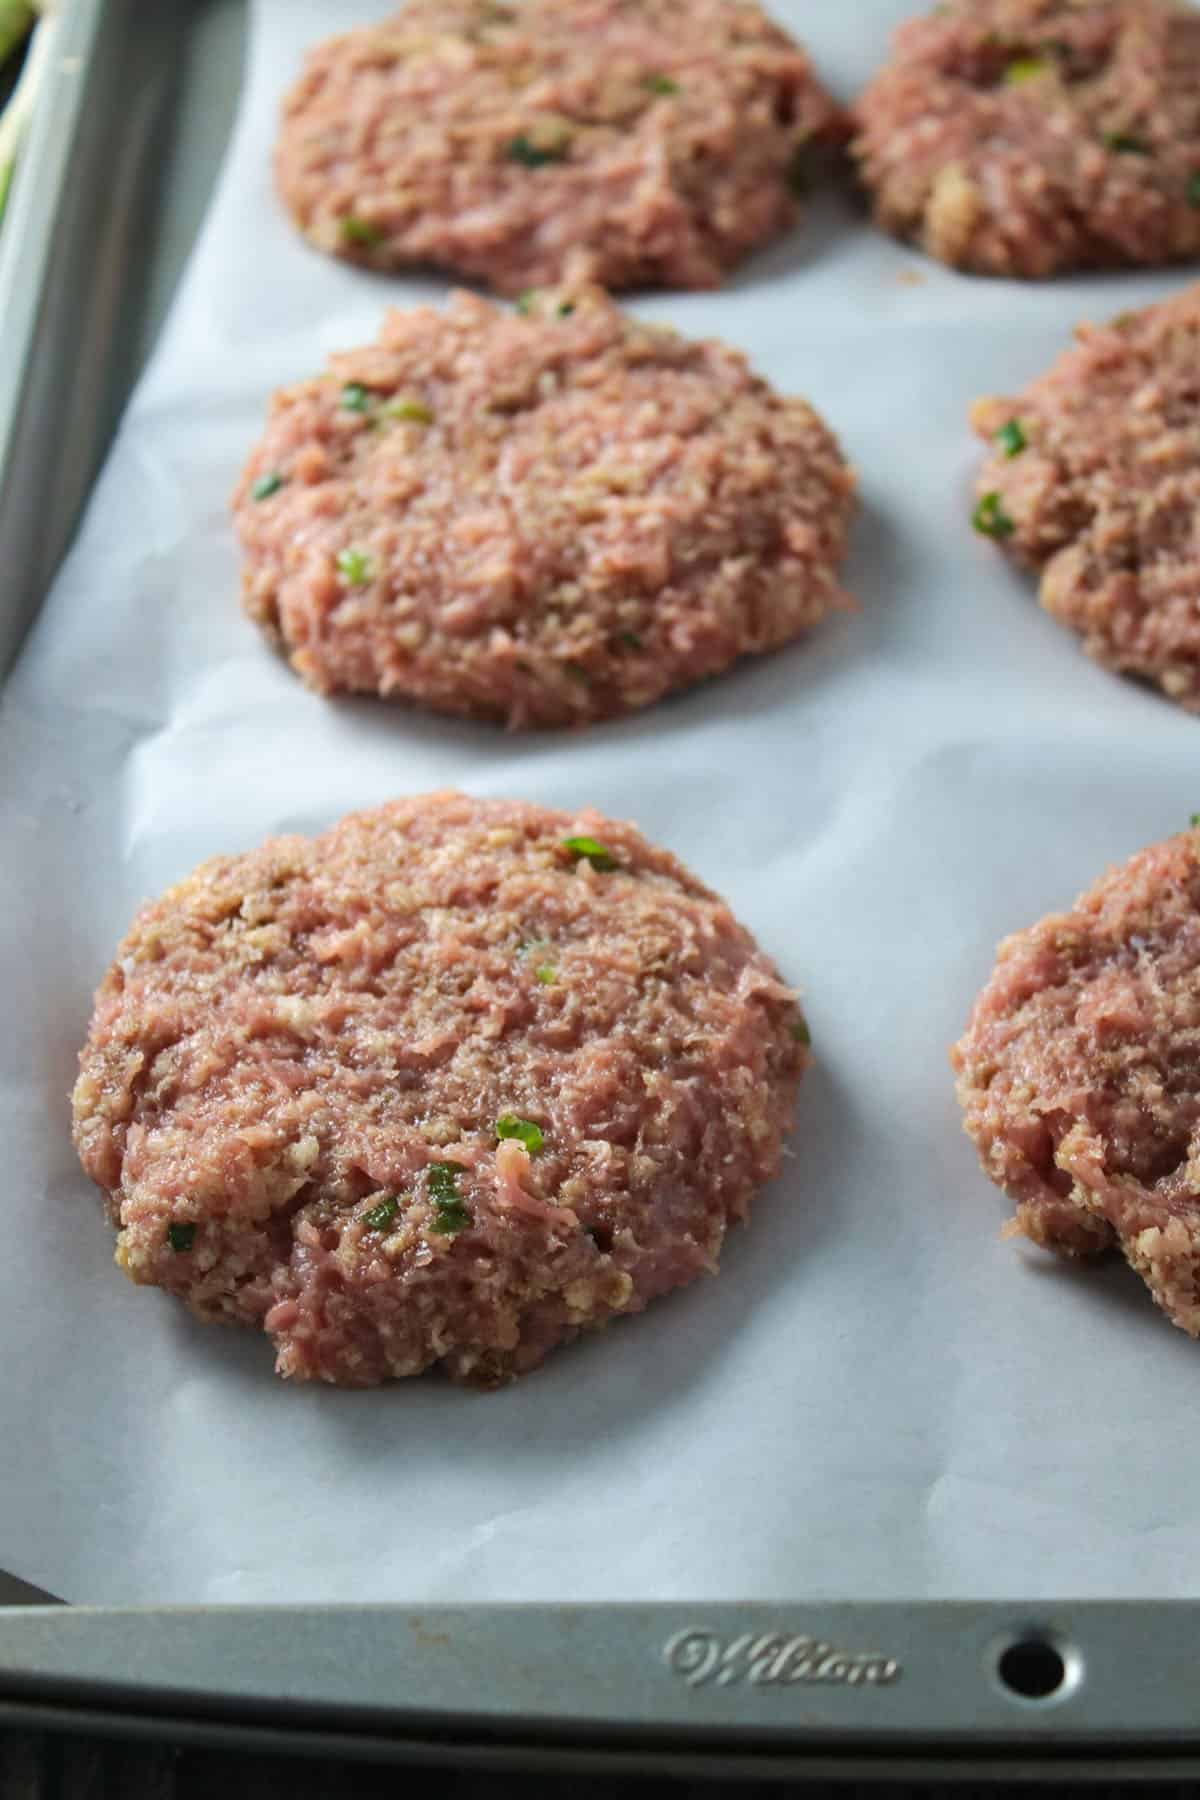 The formed chicken burger patties, arranged on a baking tray.